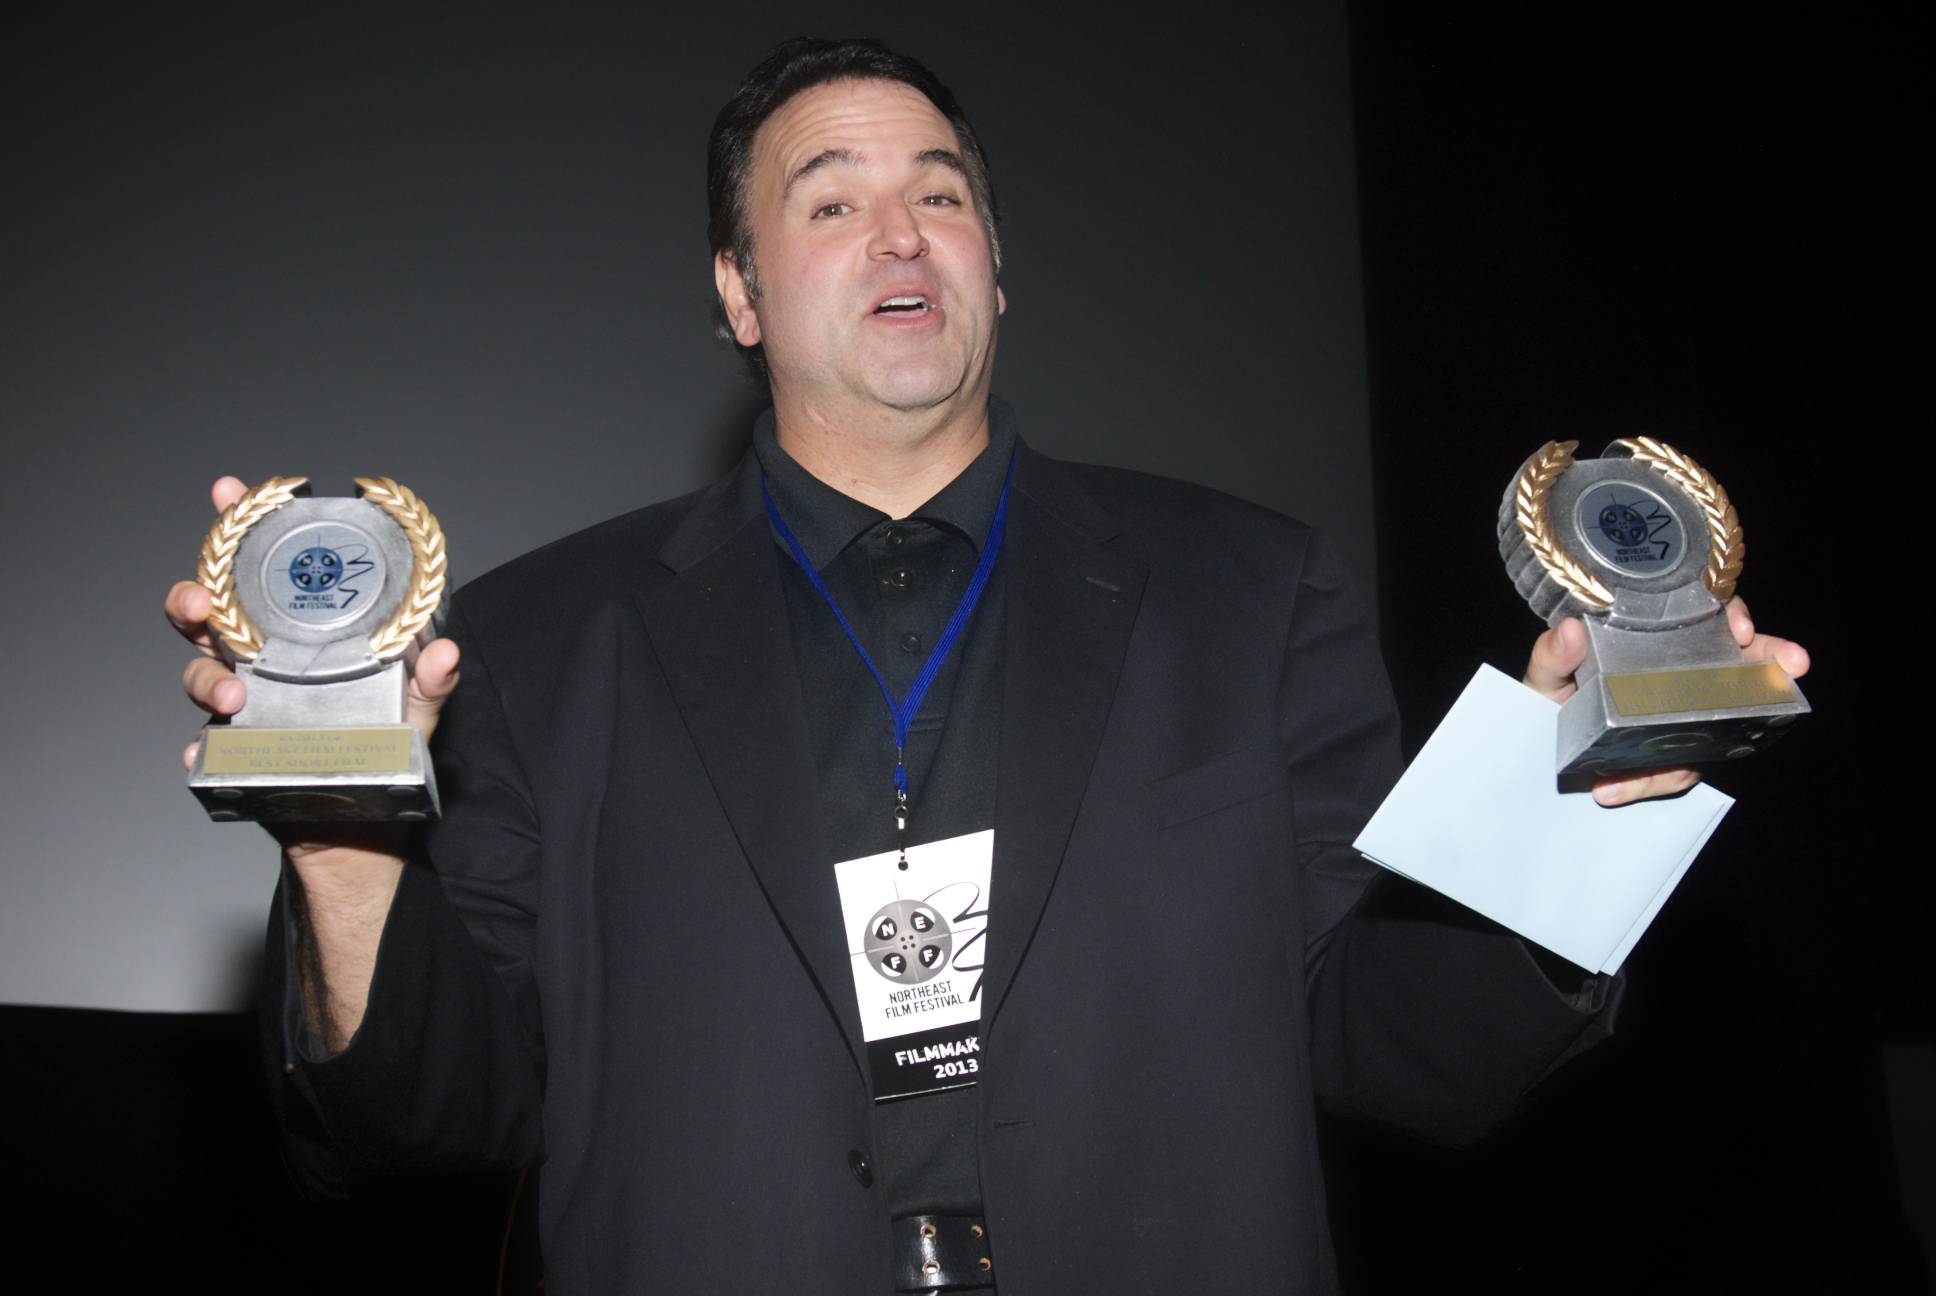 Sam Borowski displays the two awards he won at the 2013 Northeast Film Festival for his film, 